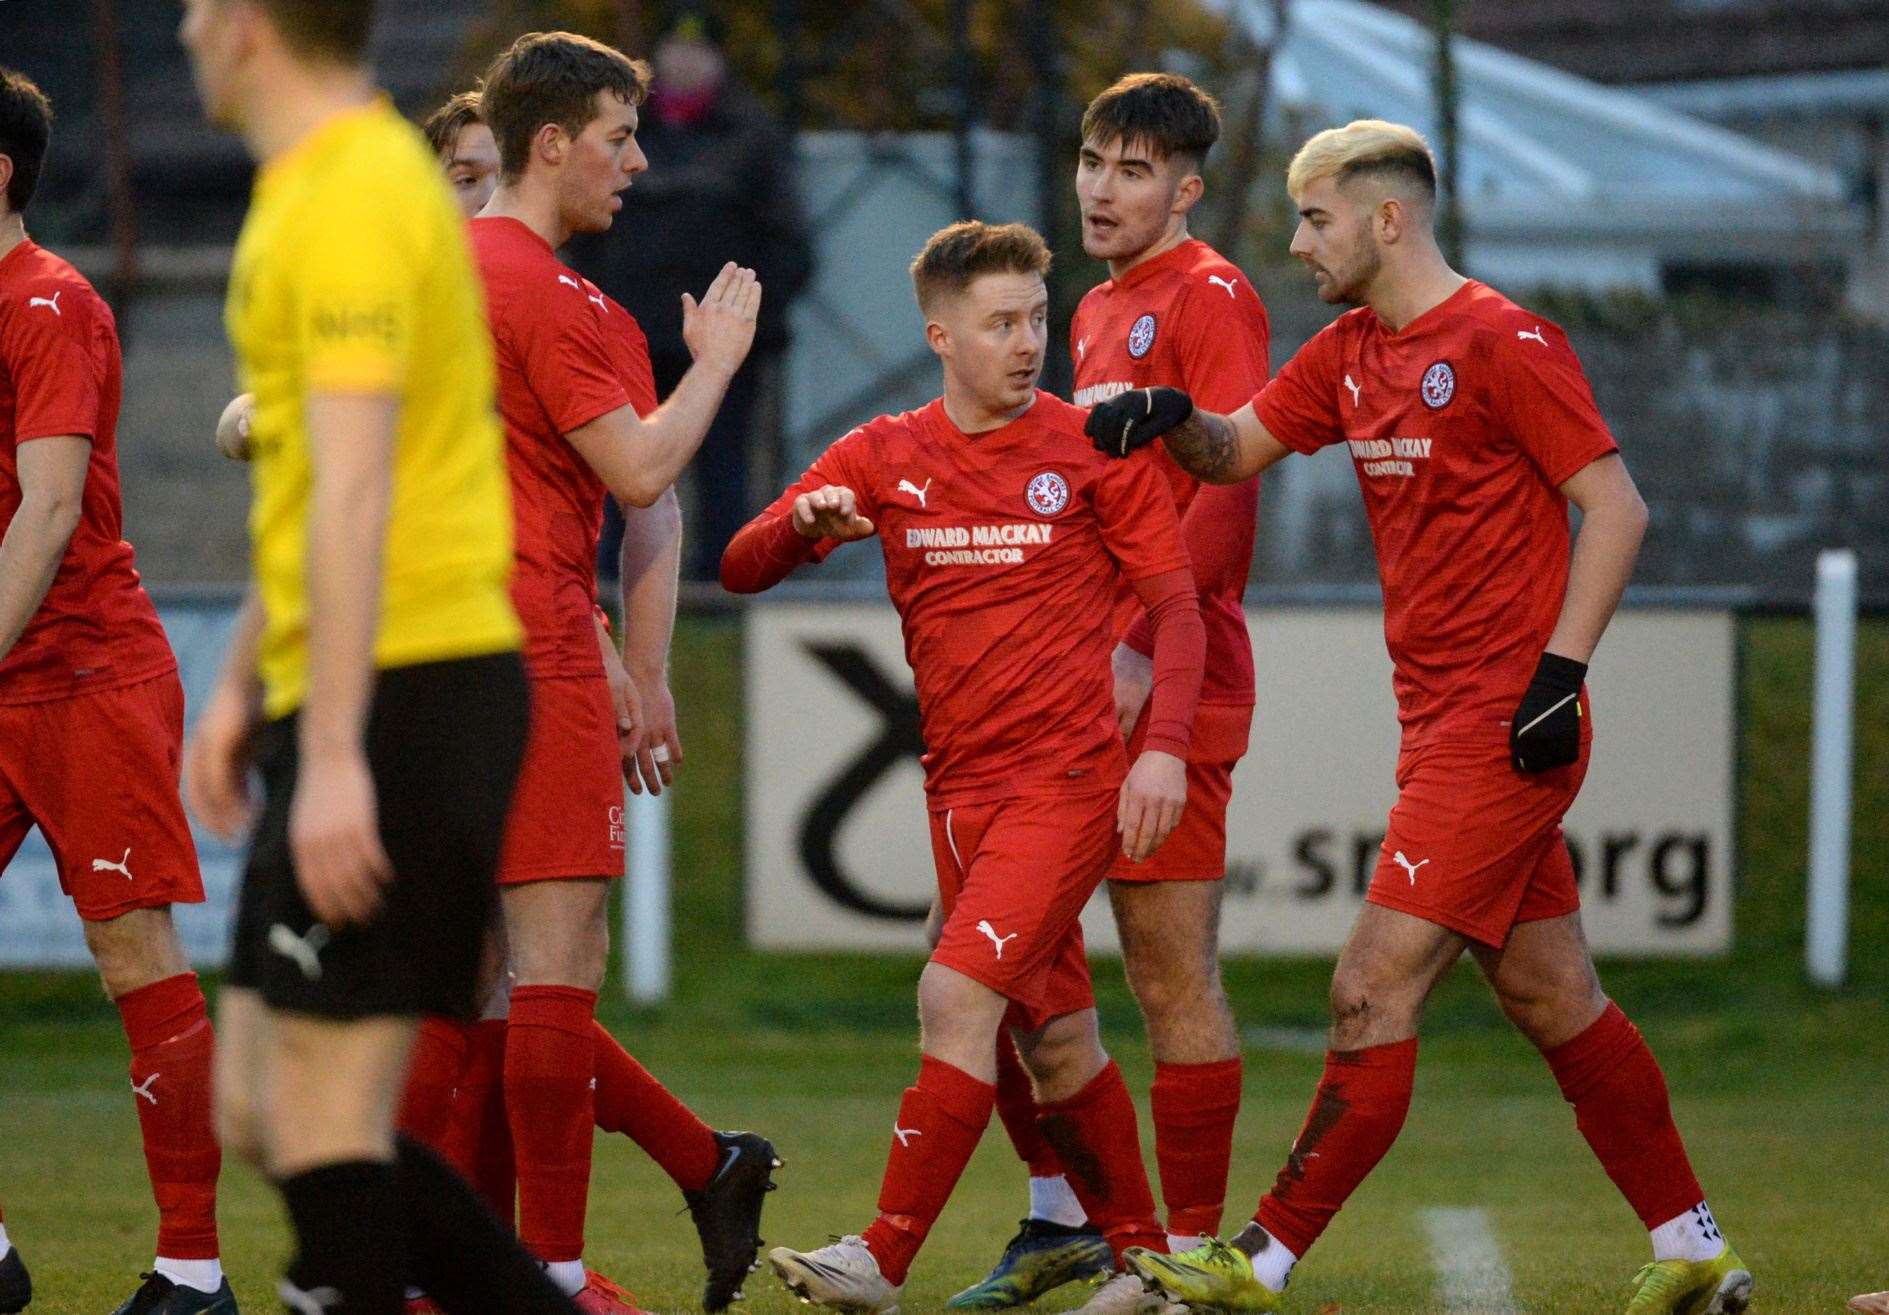 Nairn County v Brora Rangers 15 January 2022: Andy Macrae celebrating his goal with the Brora Rangers. Picture: James Mackenzie.